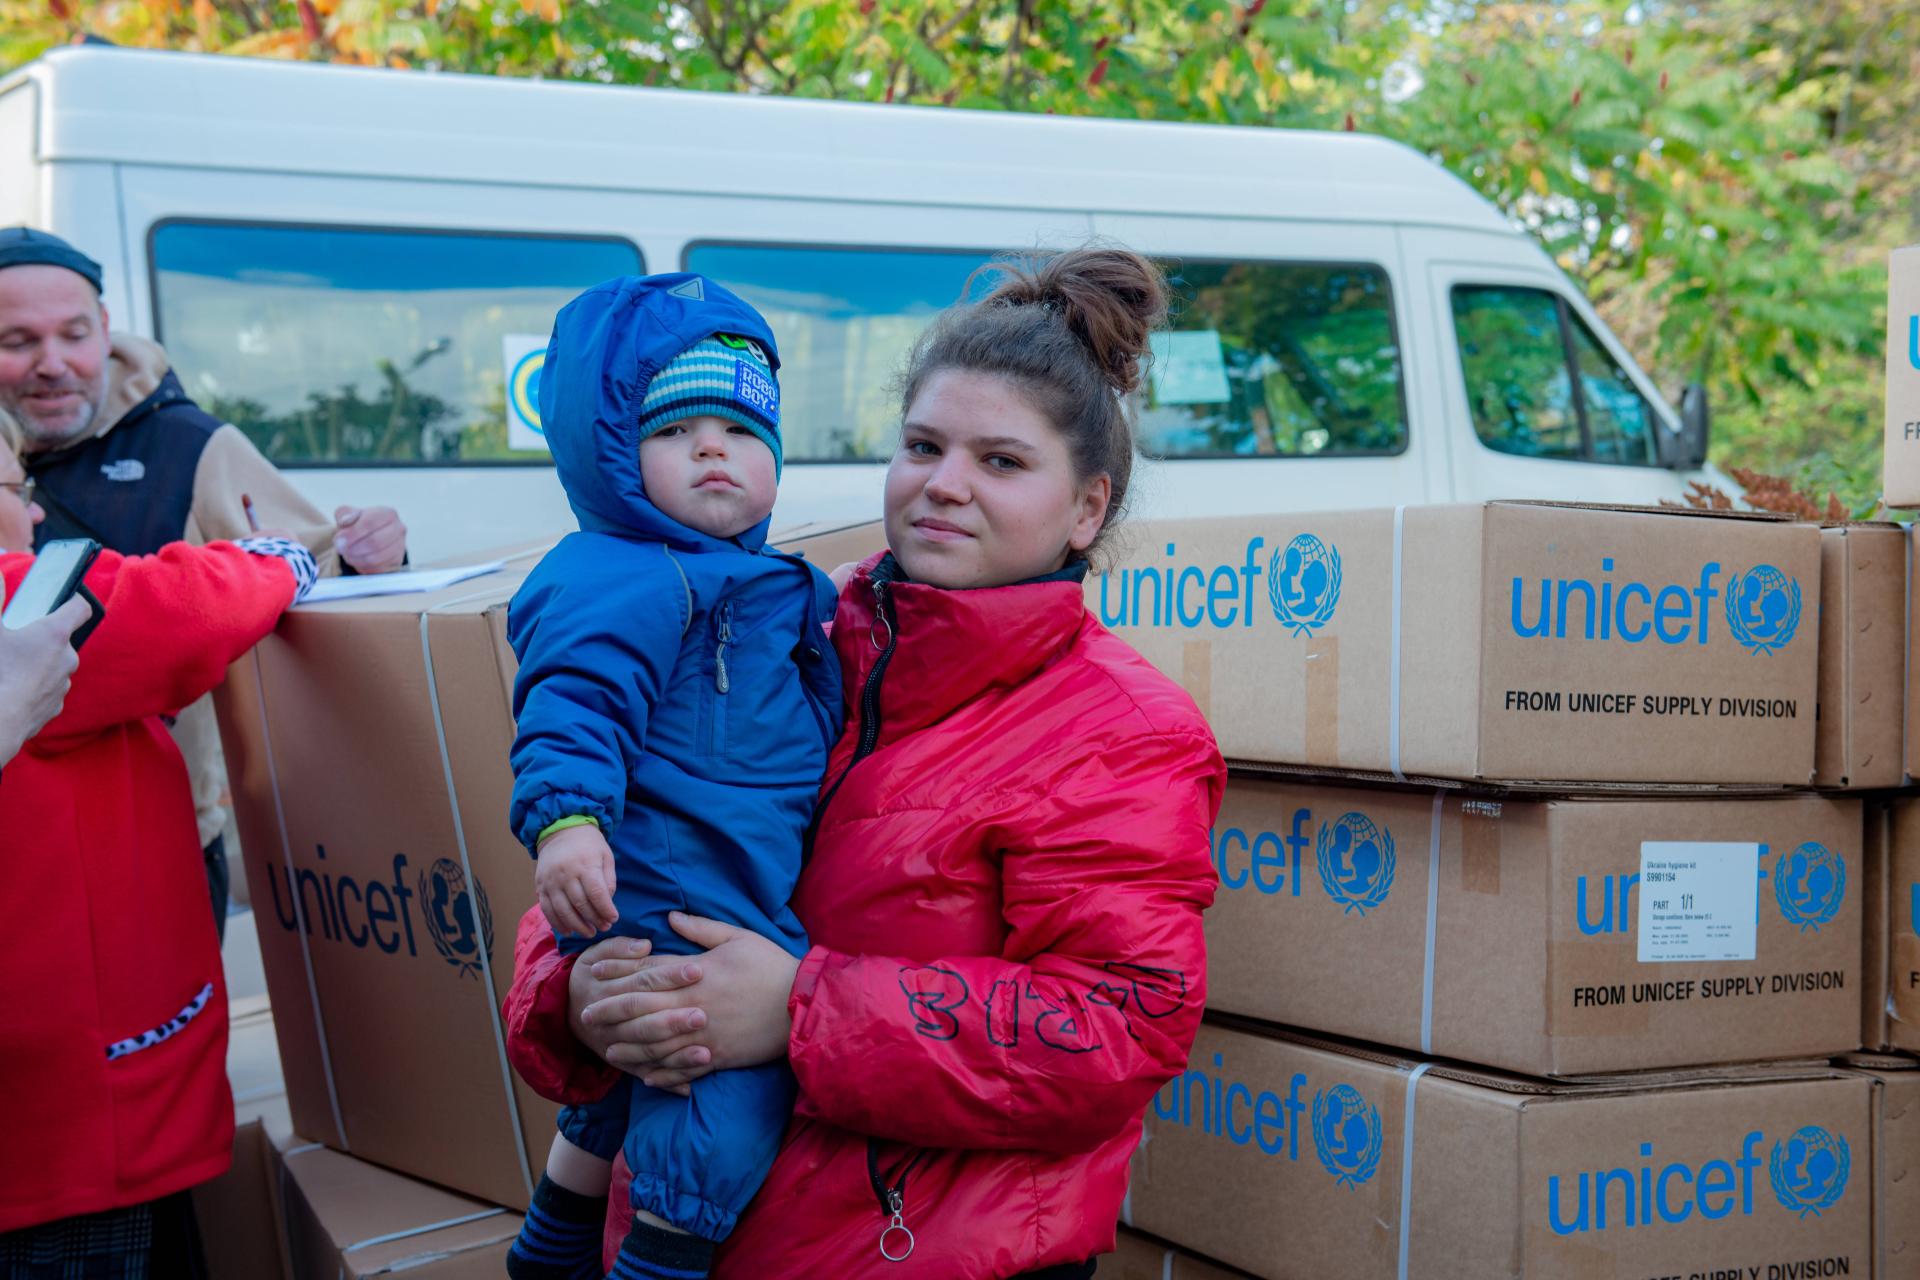 UNICEF will allocate $450 million for the front-line areas of Ukraine